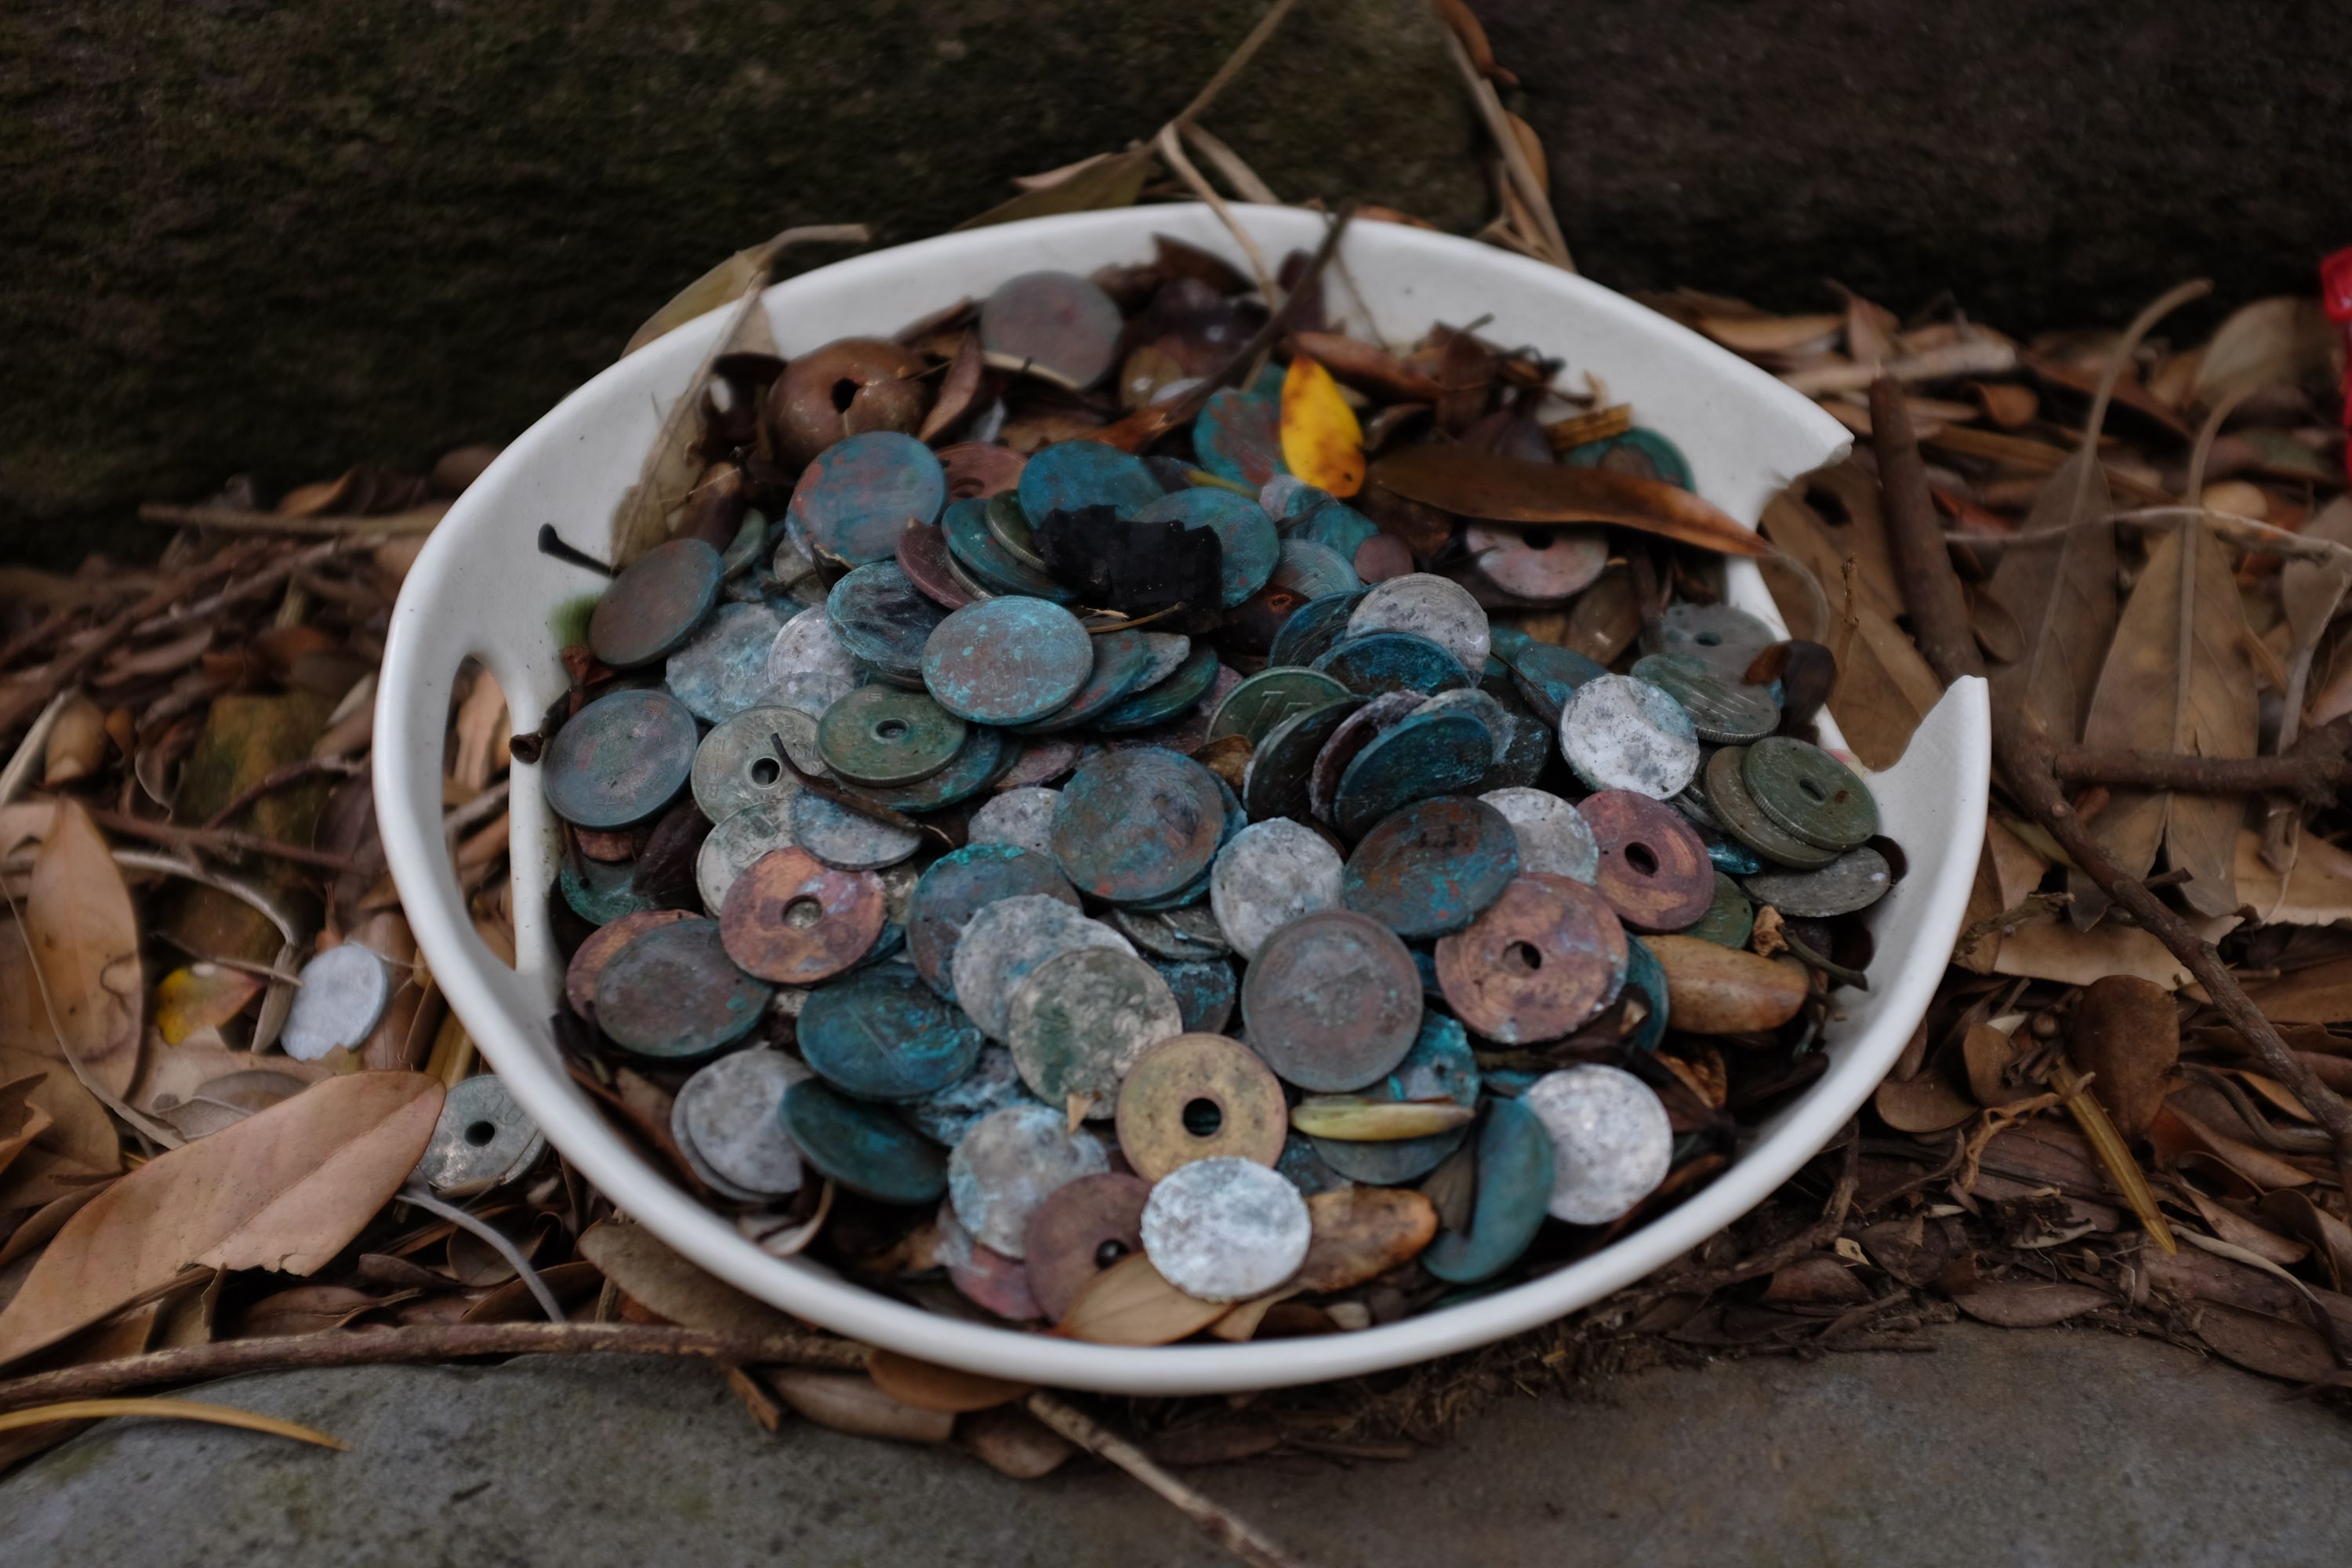 A dish of very old coins at a shrine.